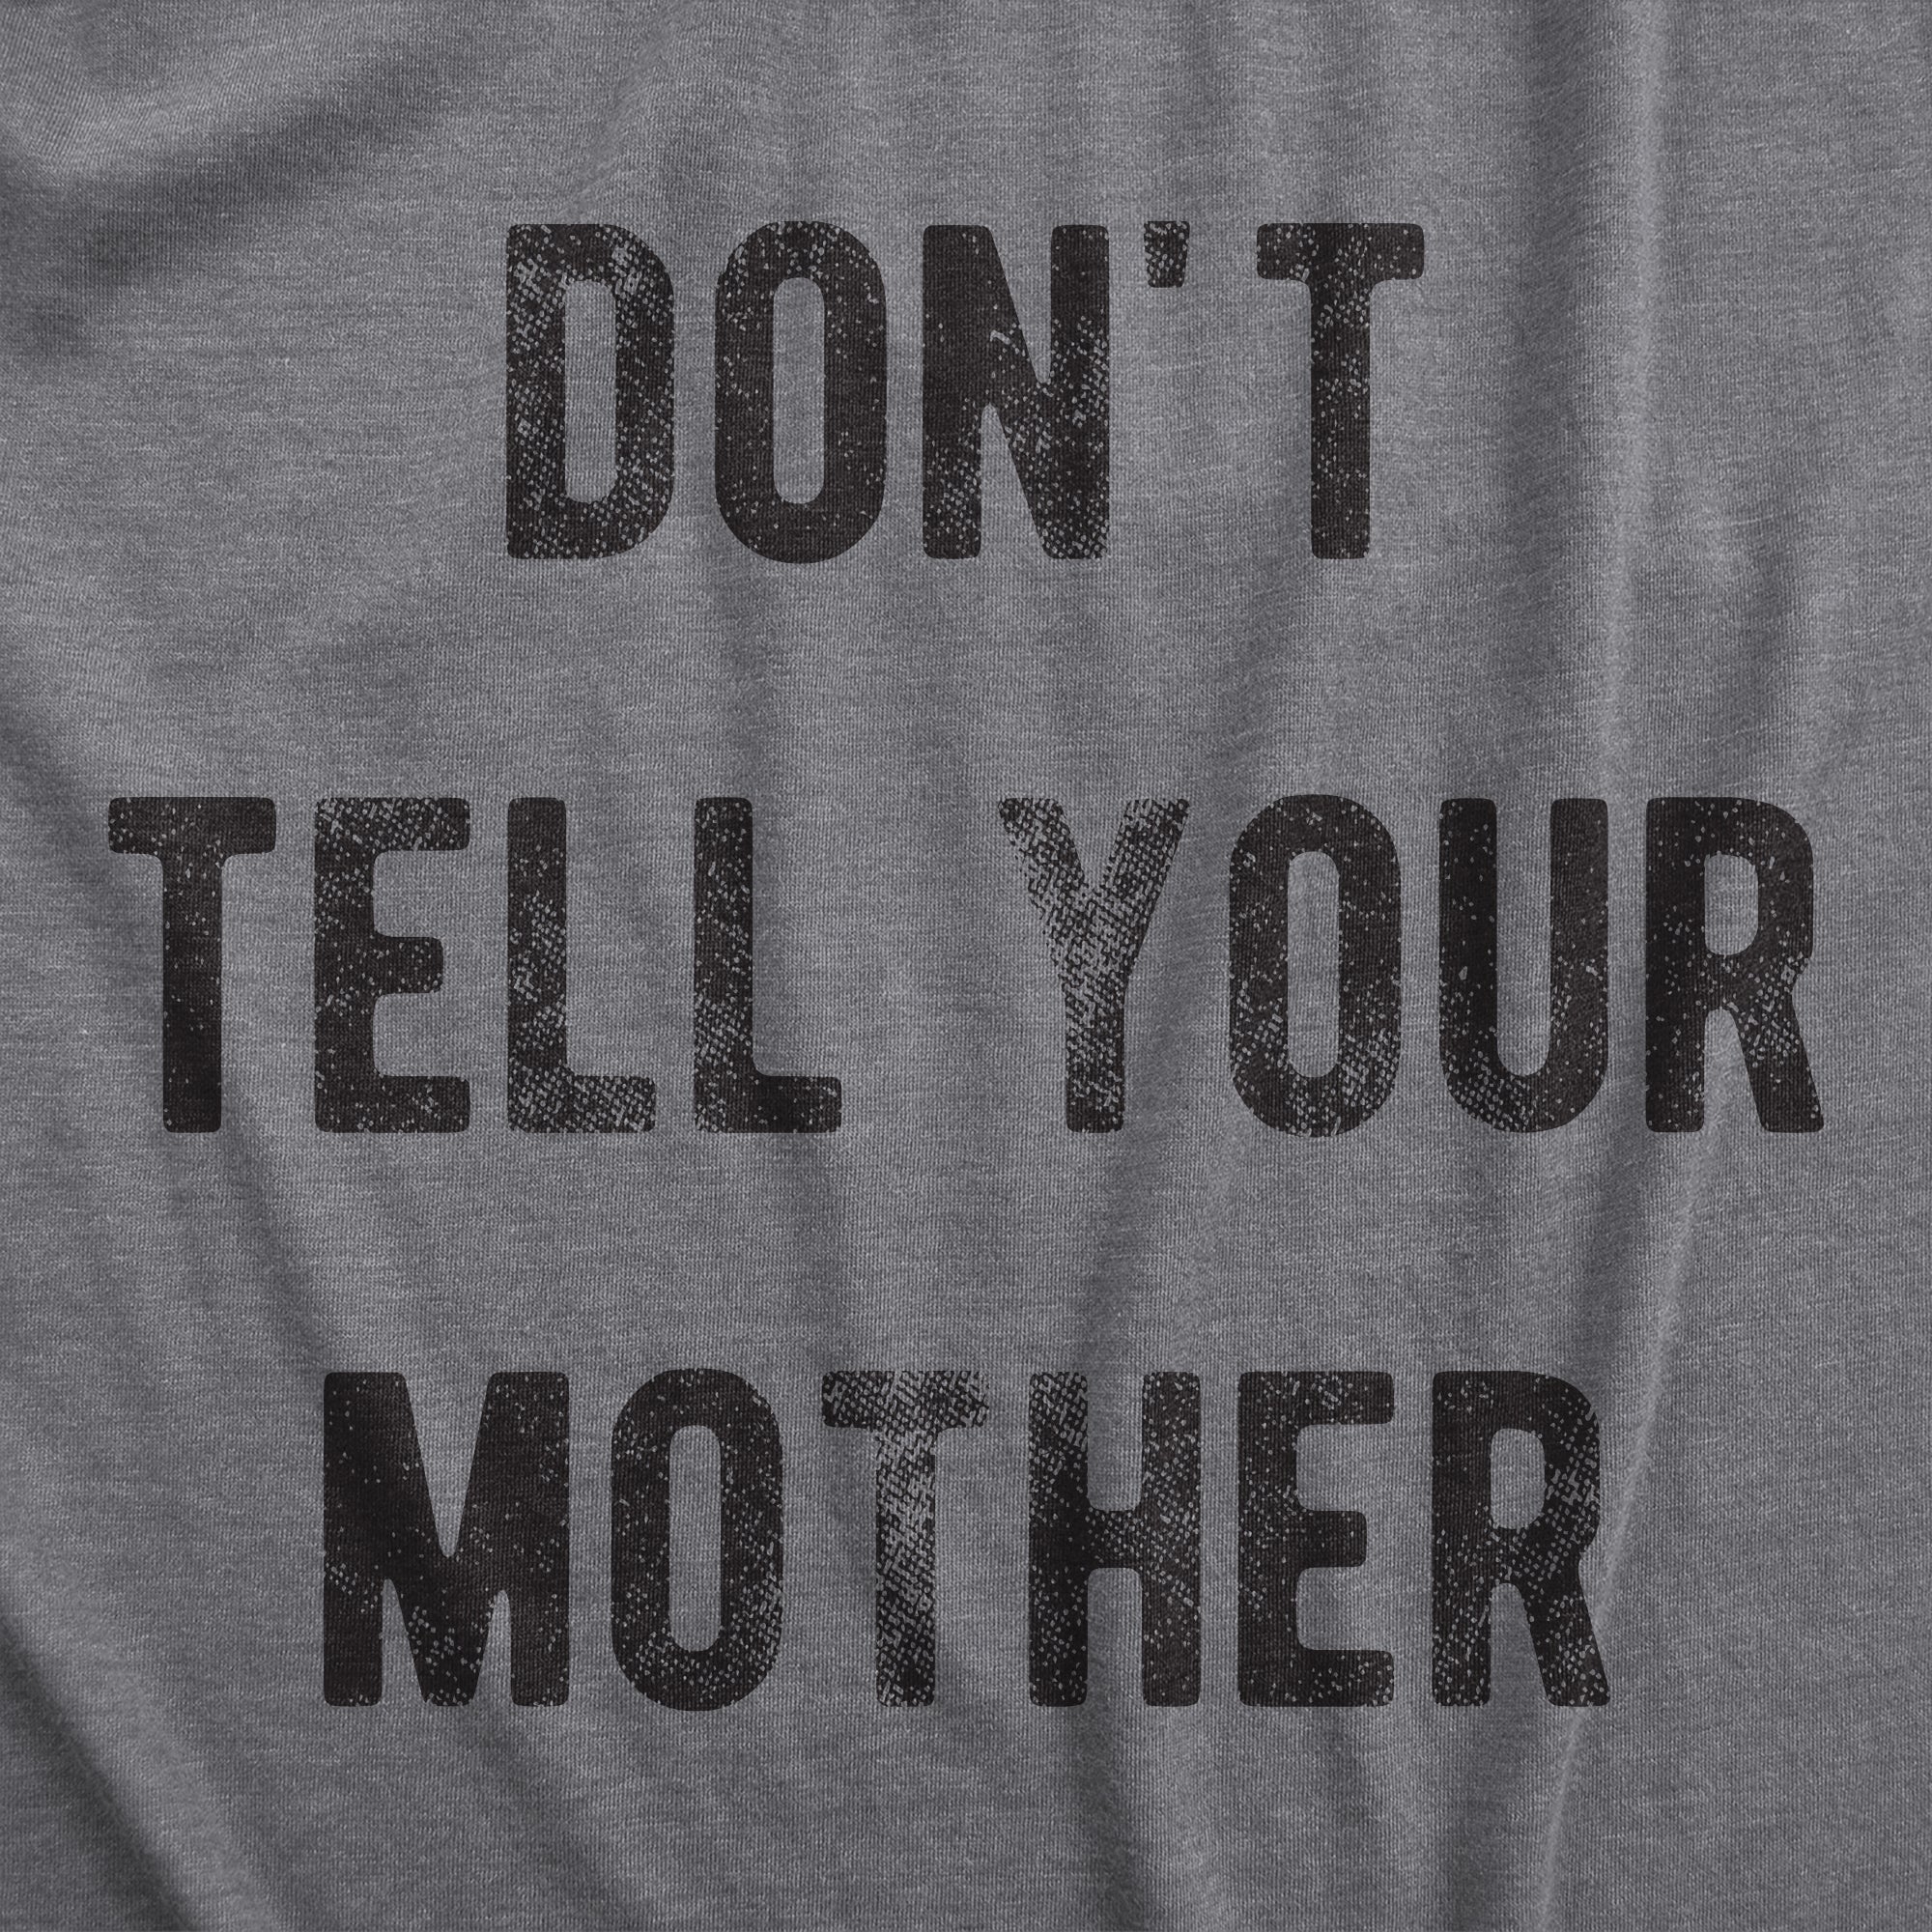 Funny Dark Heather Grey - MOTHER Dont Tell Your Mother Mens T Shirt Nerdy Sarcastic Tee